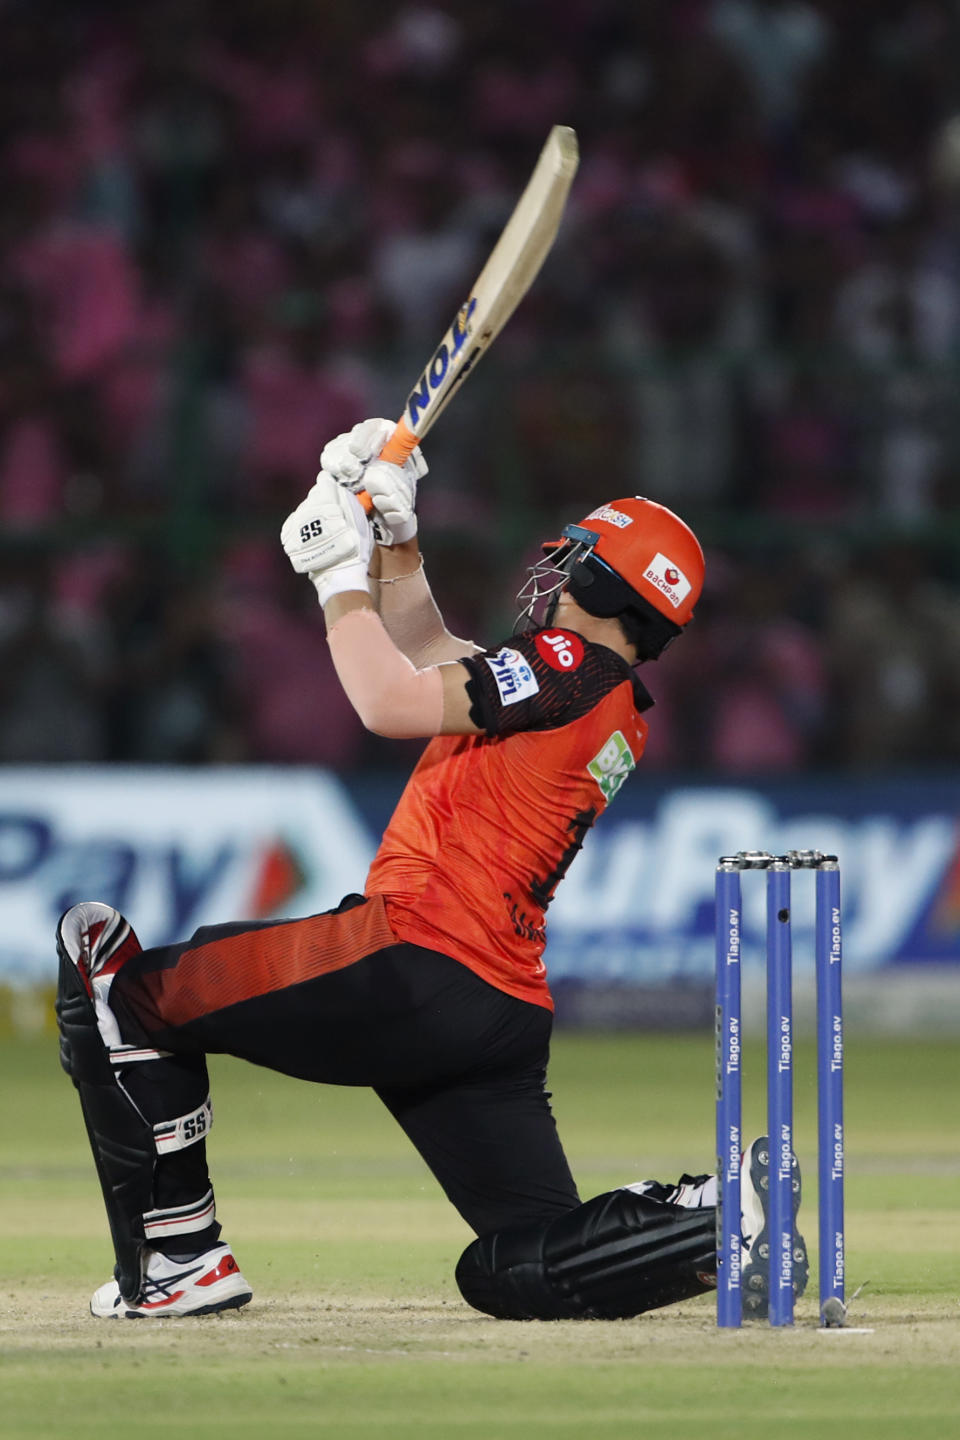 Sunrisers Hyderabad's Abdul Samad plays a shot during the Indian Premier League cricket match between Rajasthan Royals and Sunrisers Hyderabad in Jaipur, India, Sunday, May 7, 2023. (AP Photo/Surjeet Yadav)